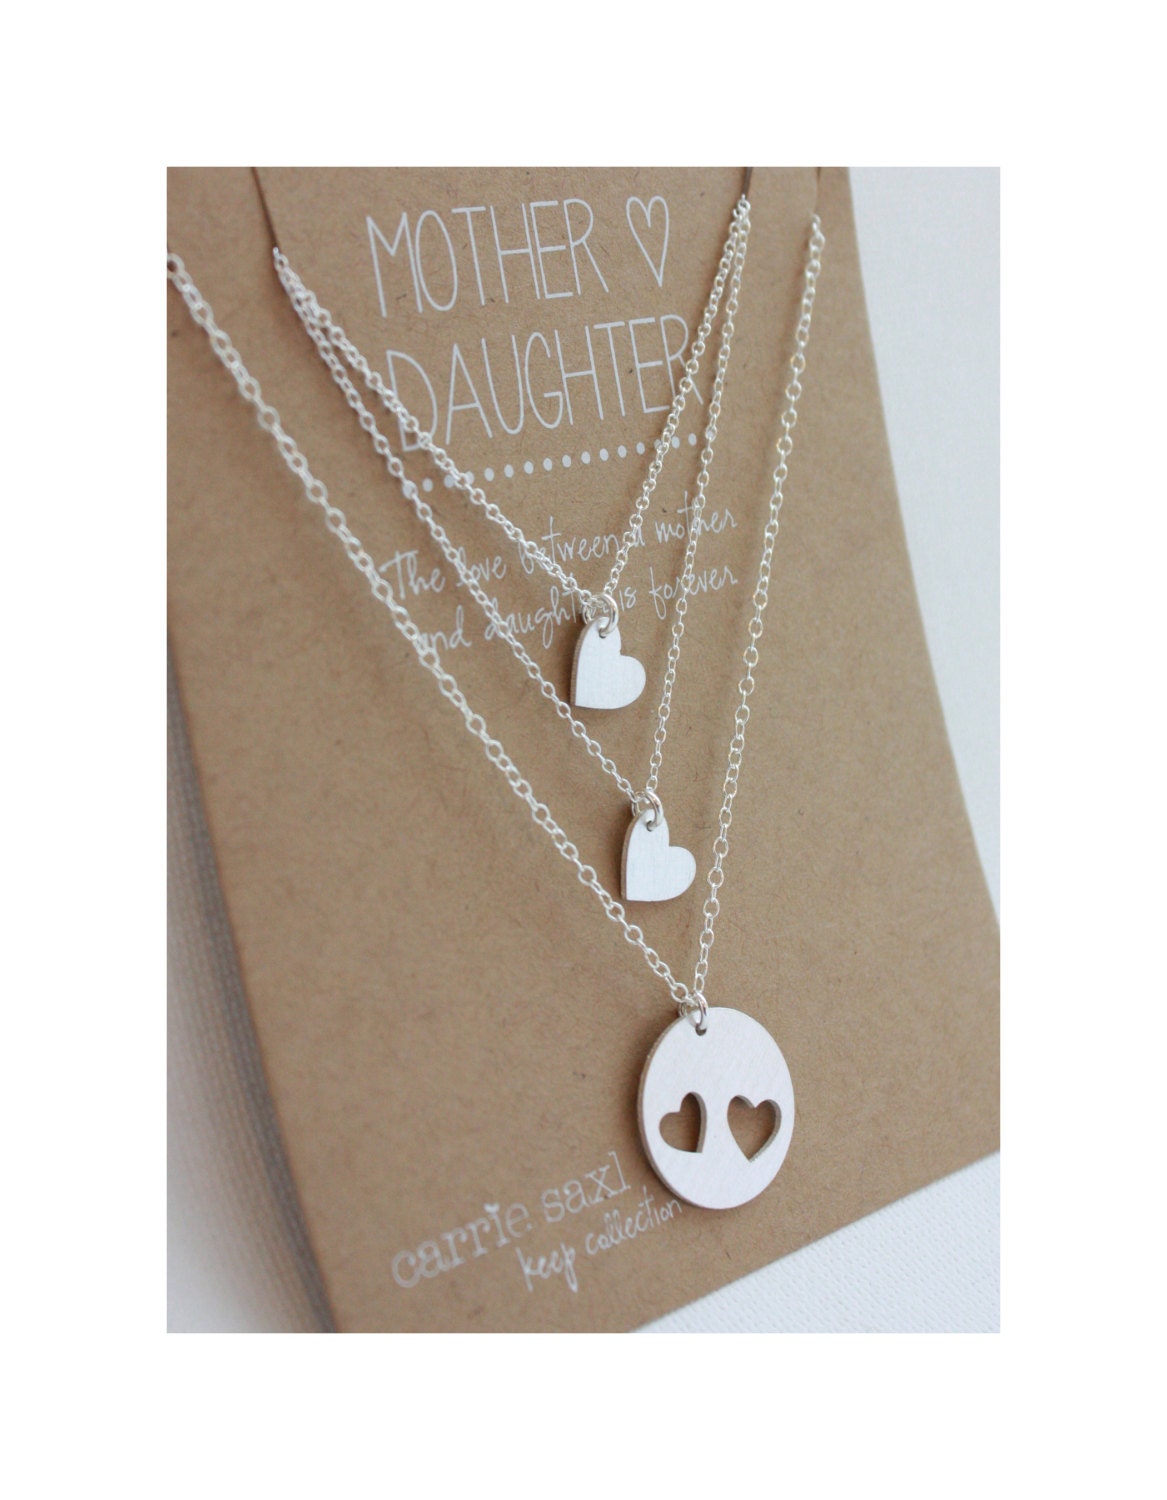 Mother Daughter Necklace Set Mother's Day jewelry